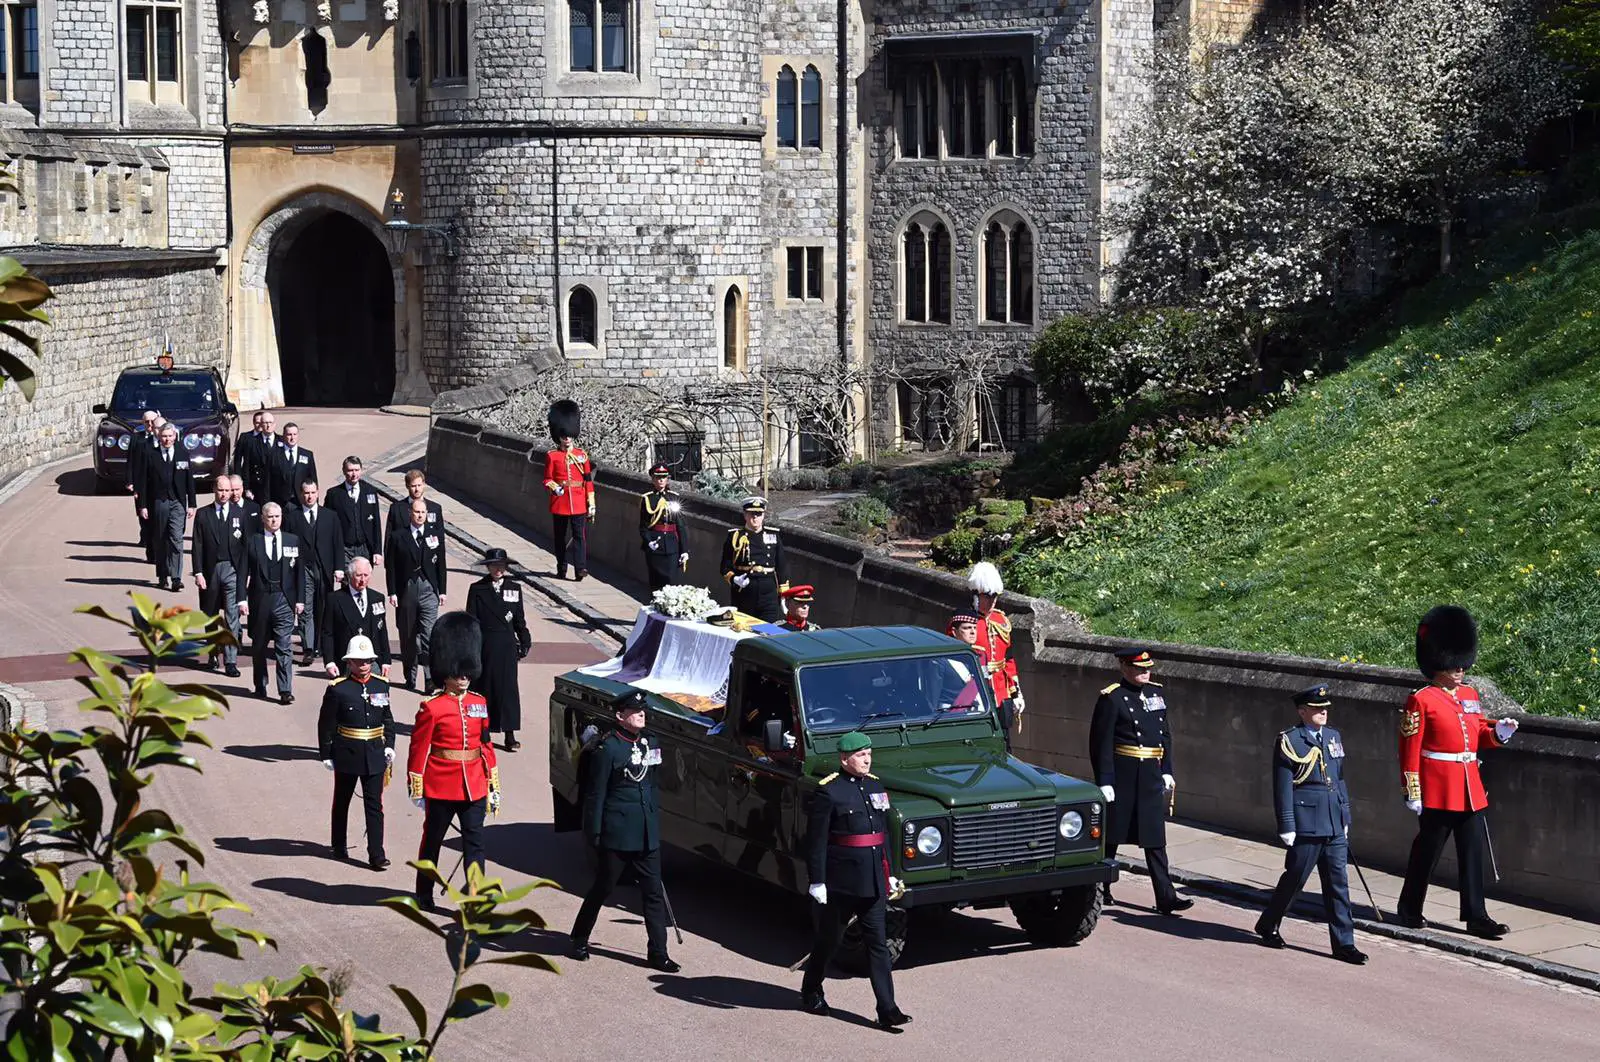 The Duke of Edinburgh, Prince Philip, was bid a very poignant and heartbreakingly beautiful farewell by his family at the St. George’s Chapel of Windsor Castle